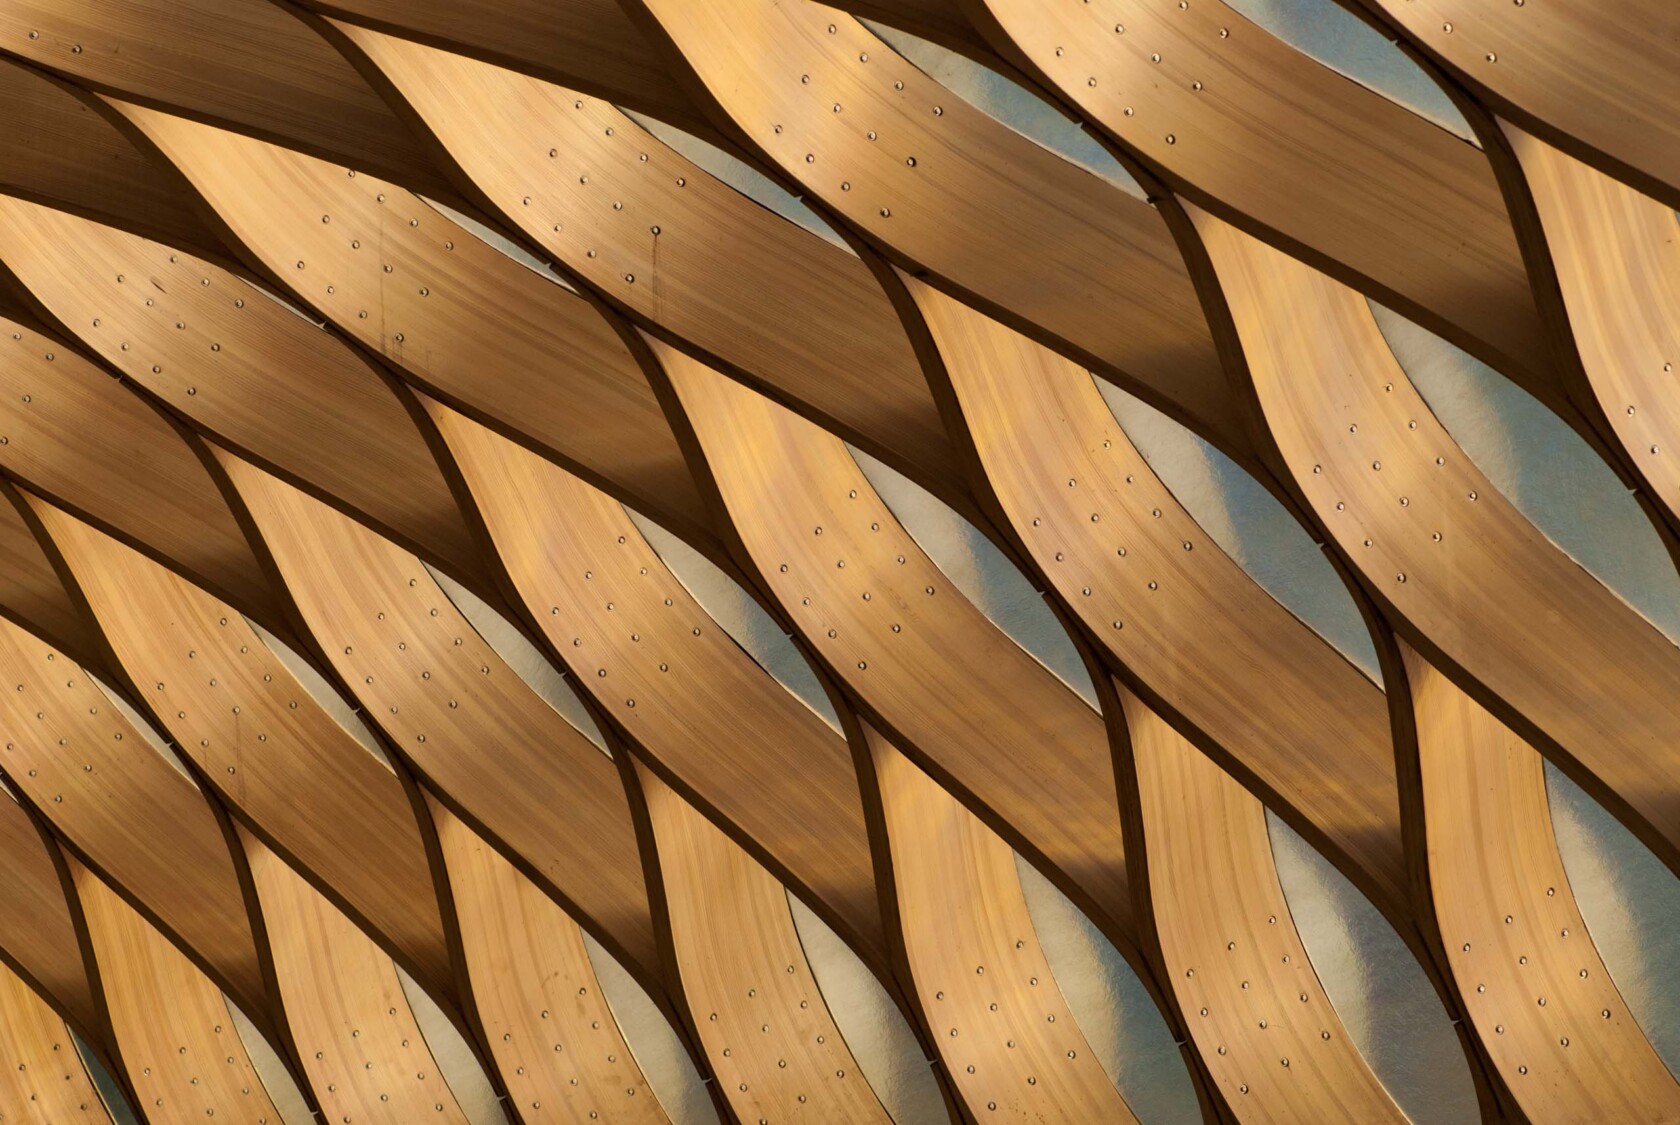 Wood architectural pattern.